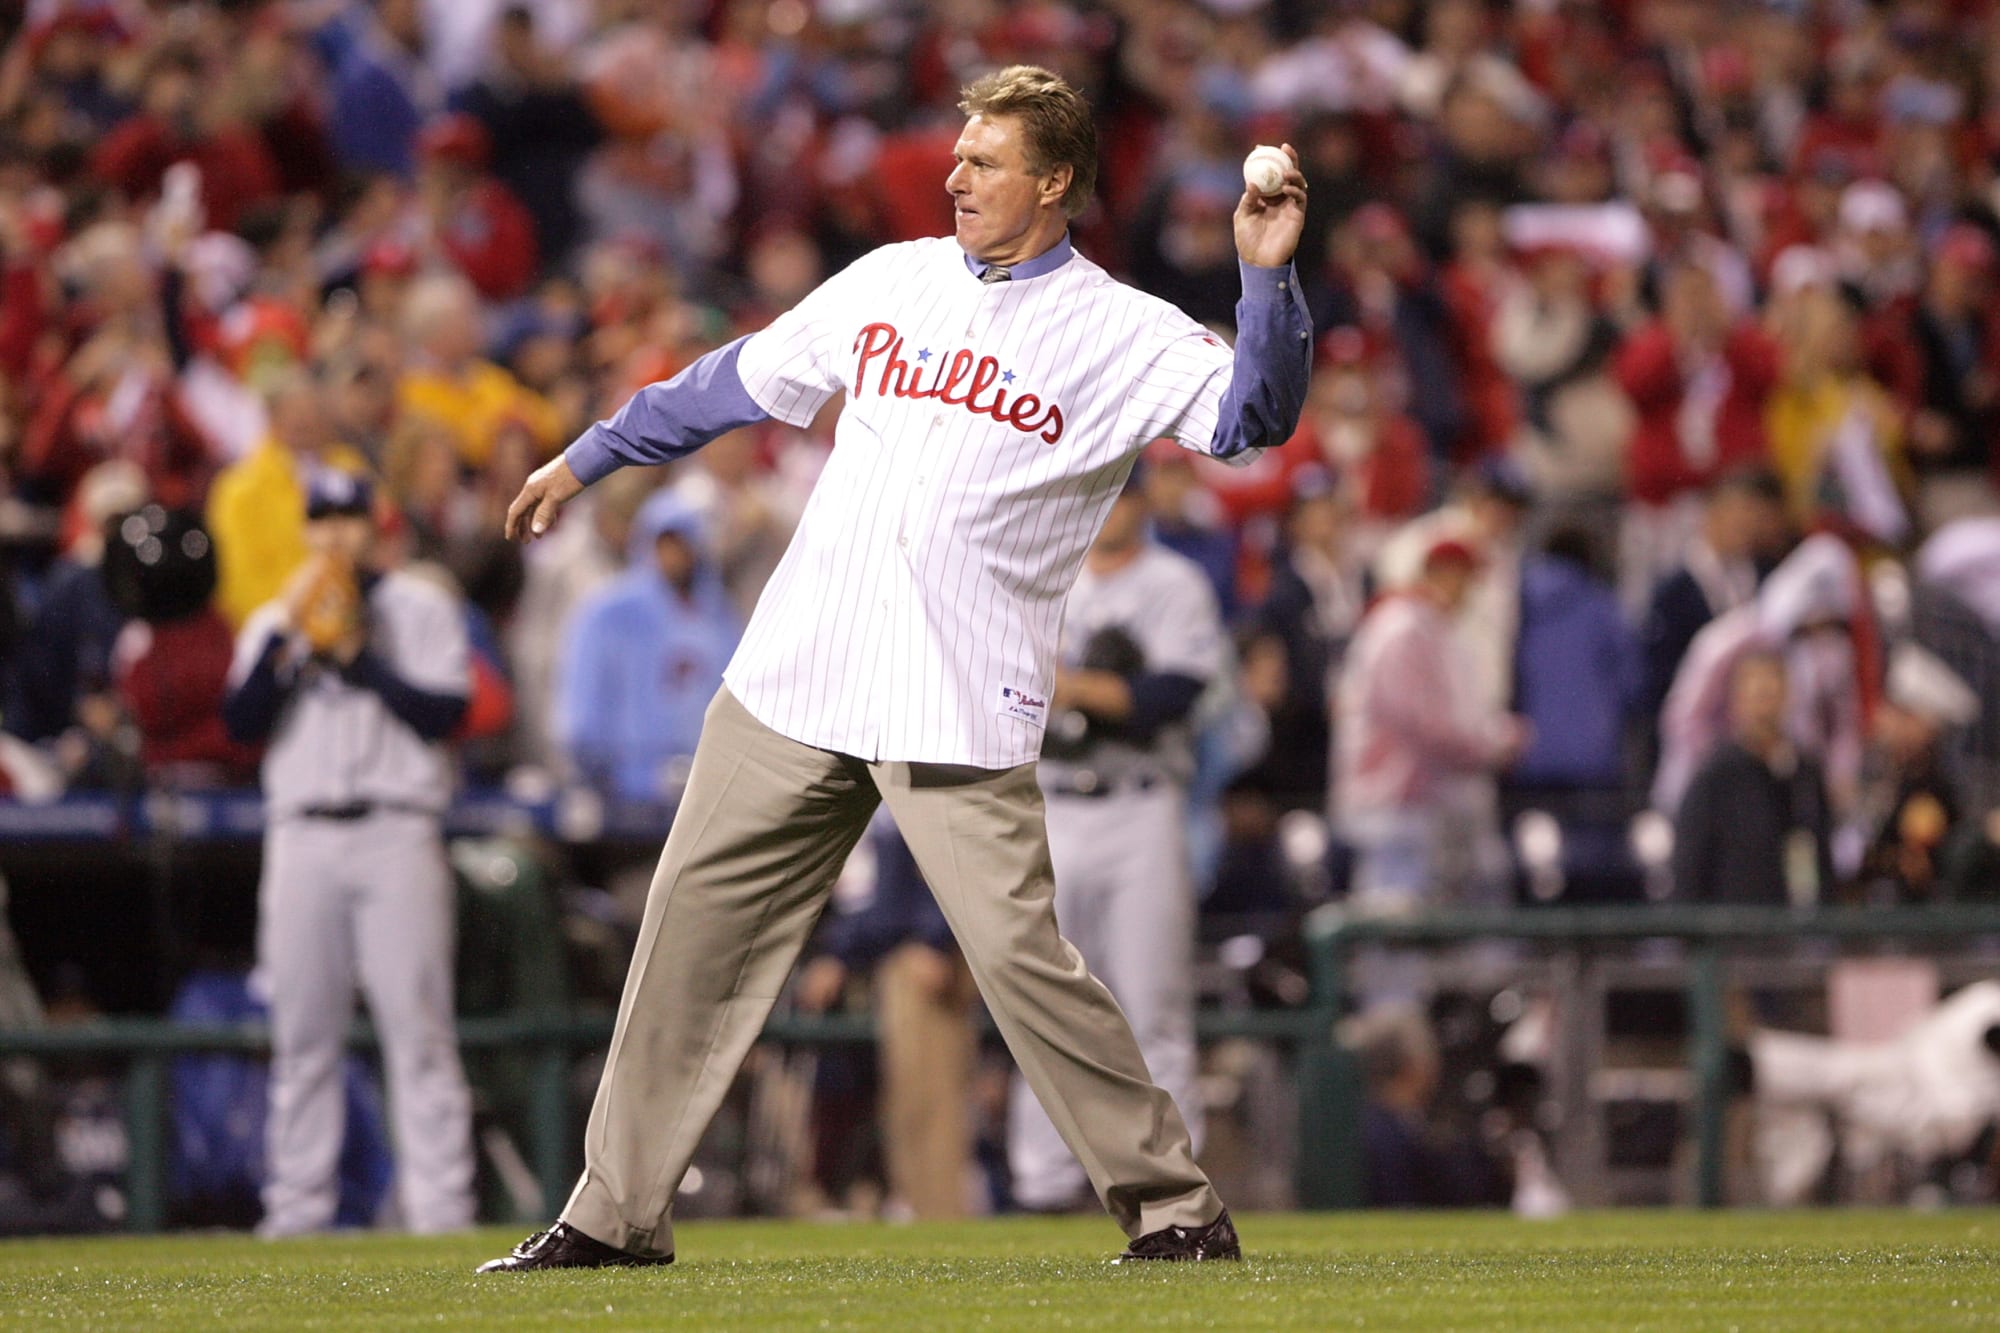 Phillies: Top ten starting and relief pitchers of the 1980's